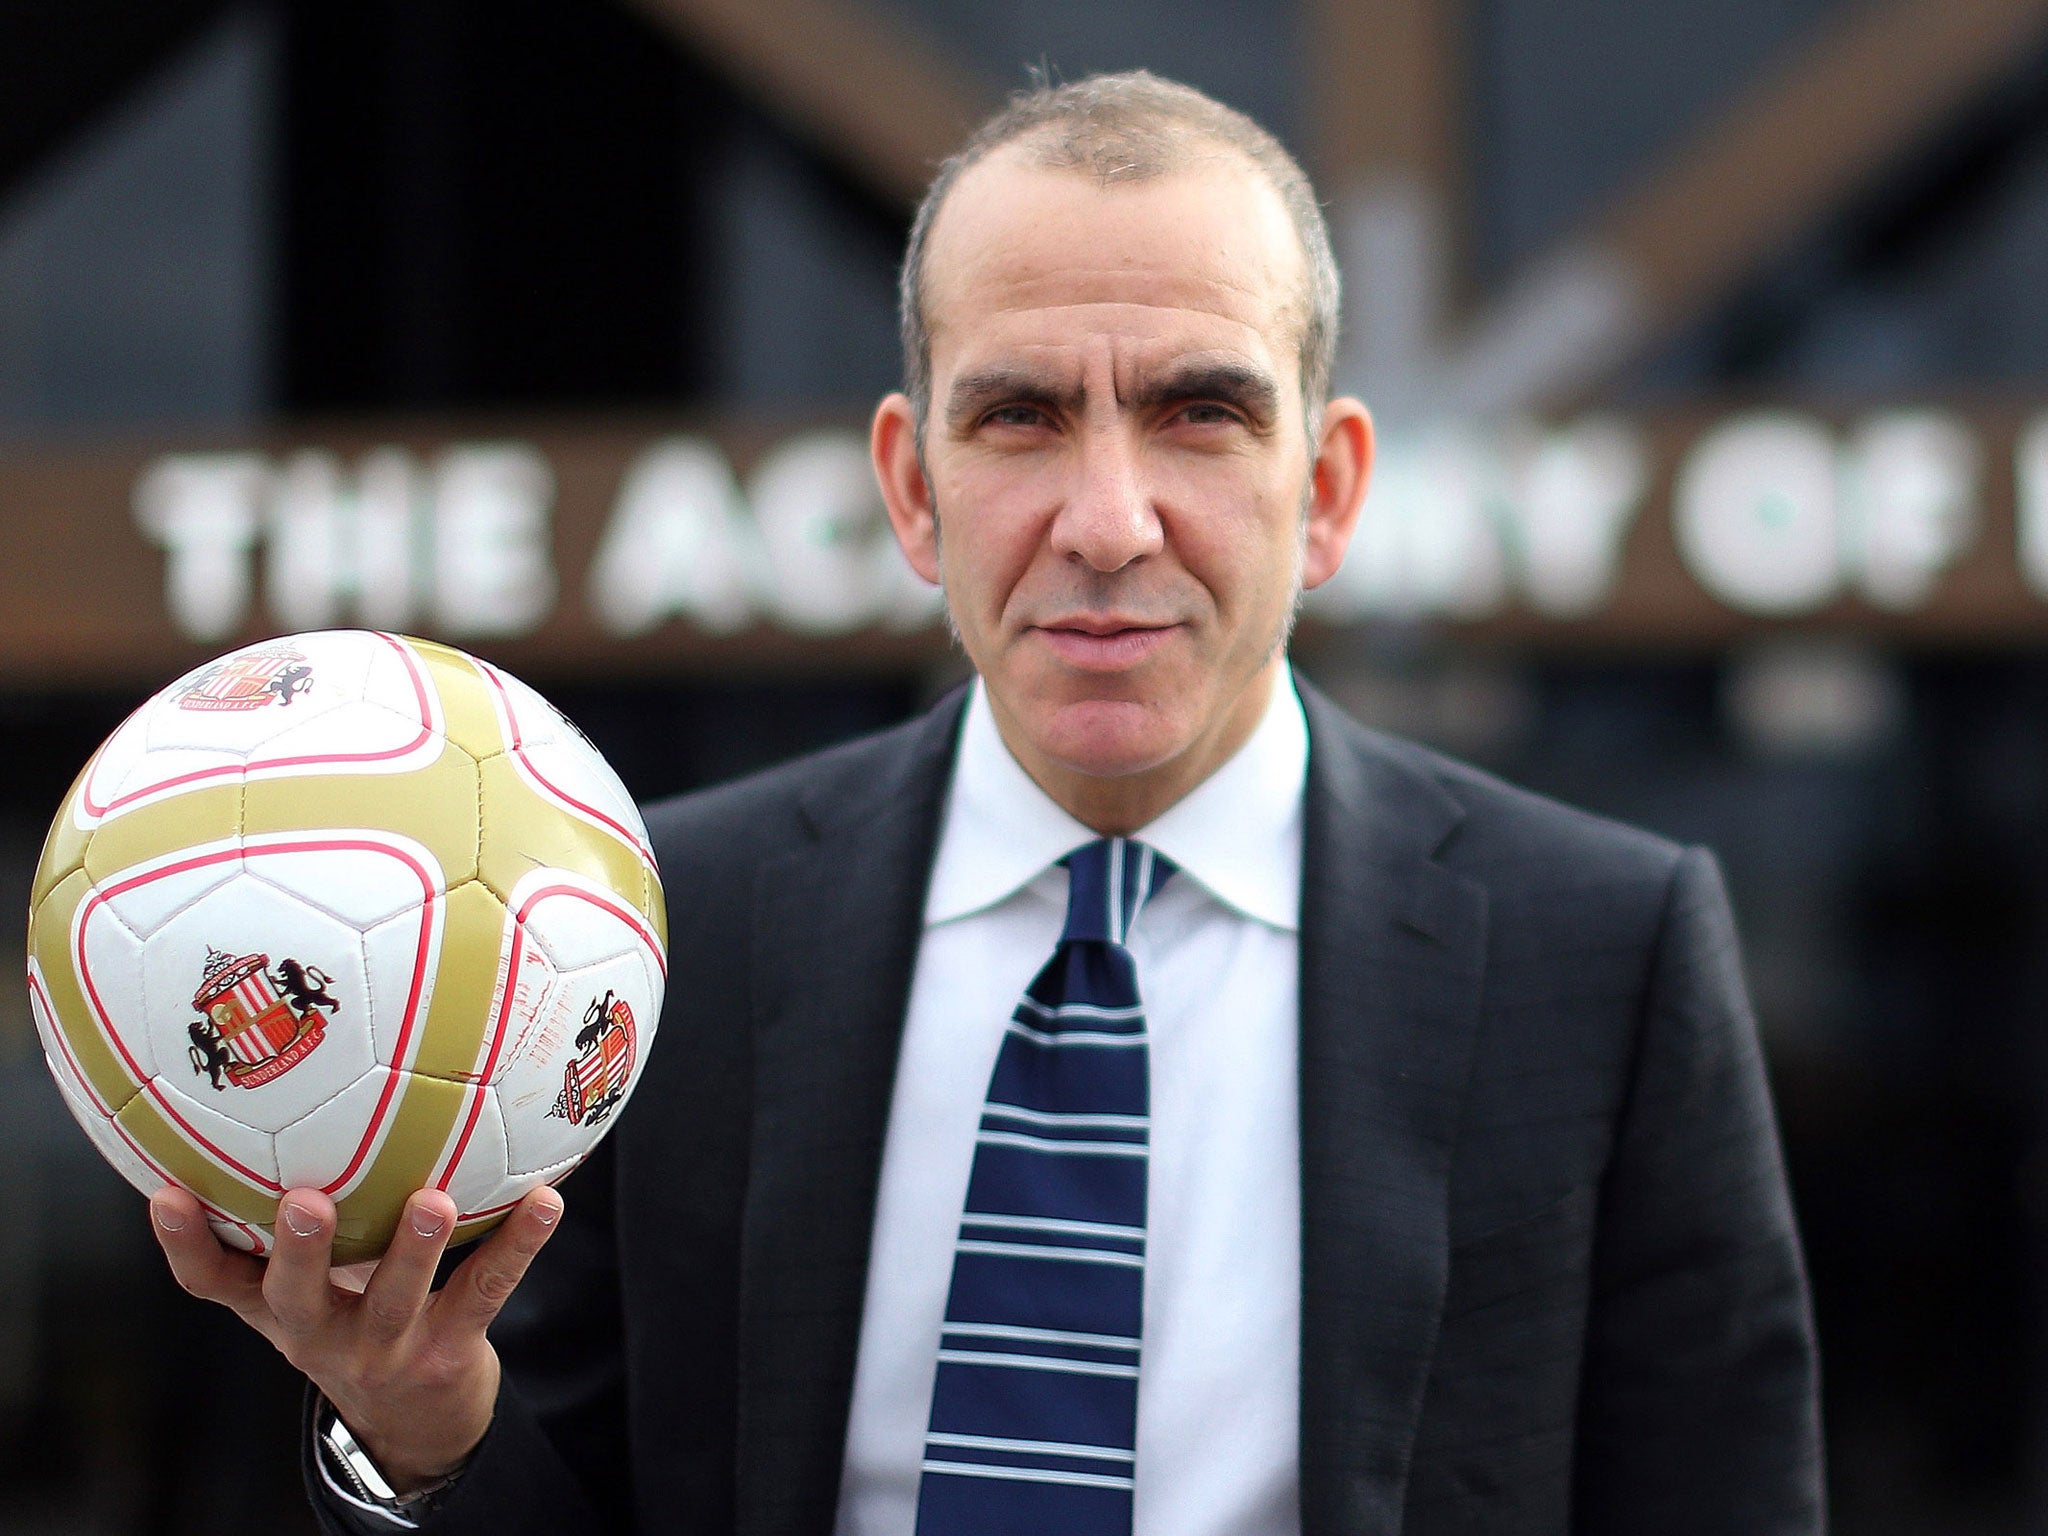 No hand grenade: but Paolo Di Canio is still holding firm to his principles